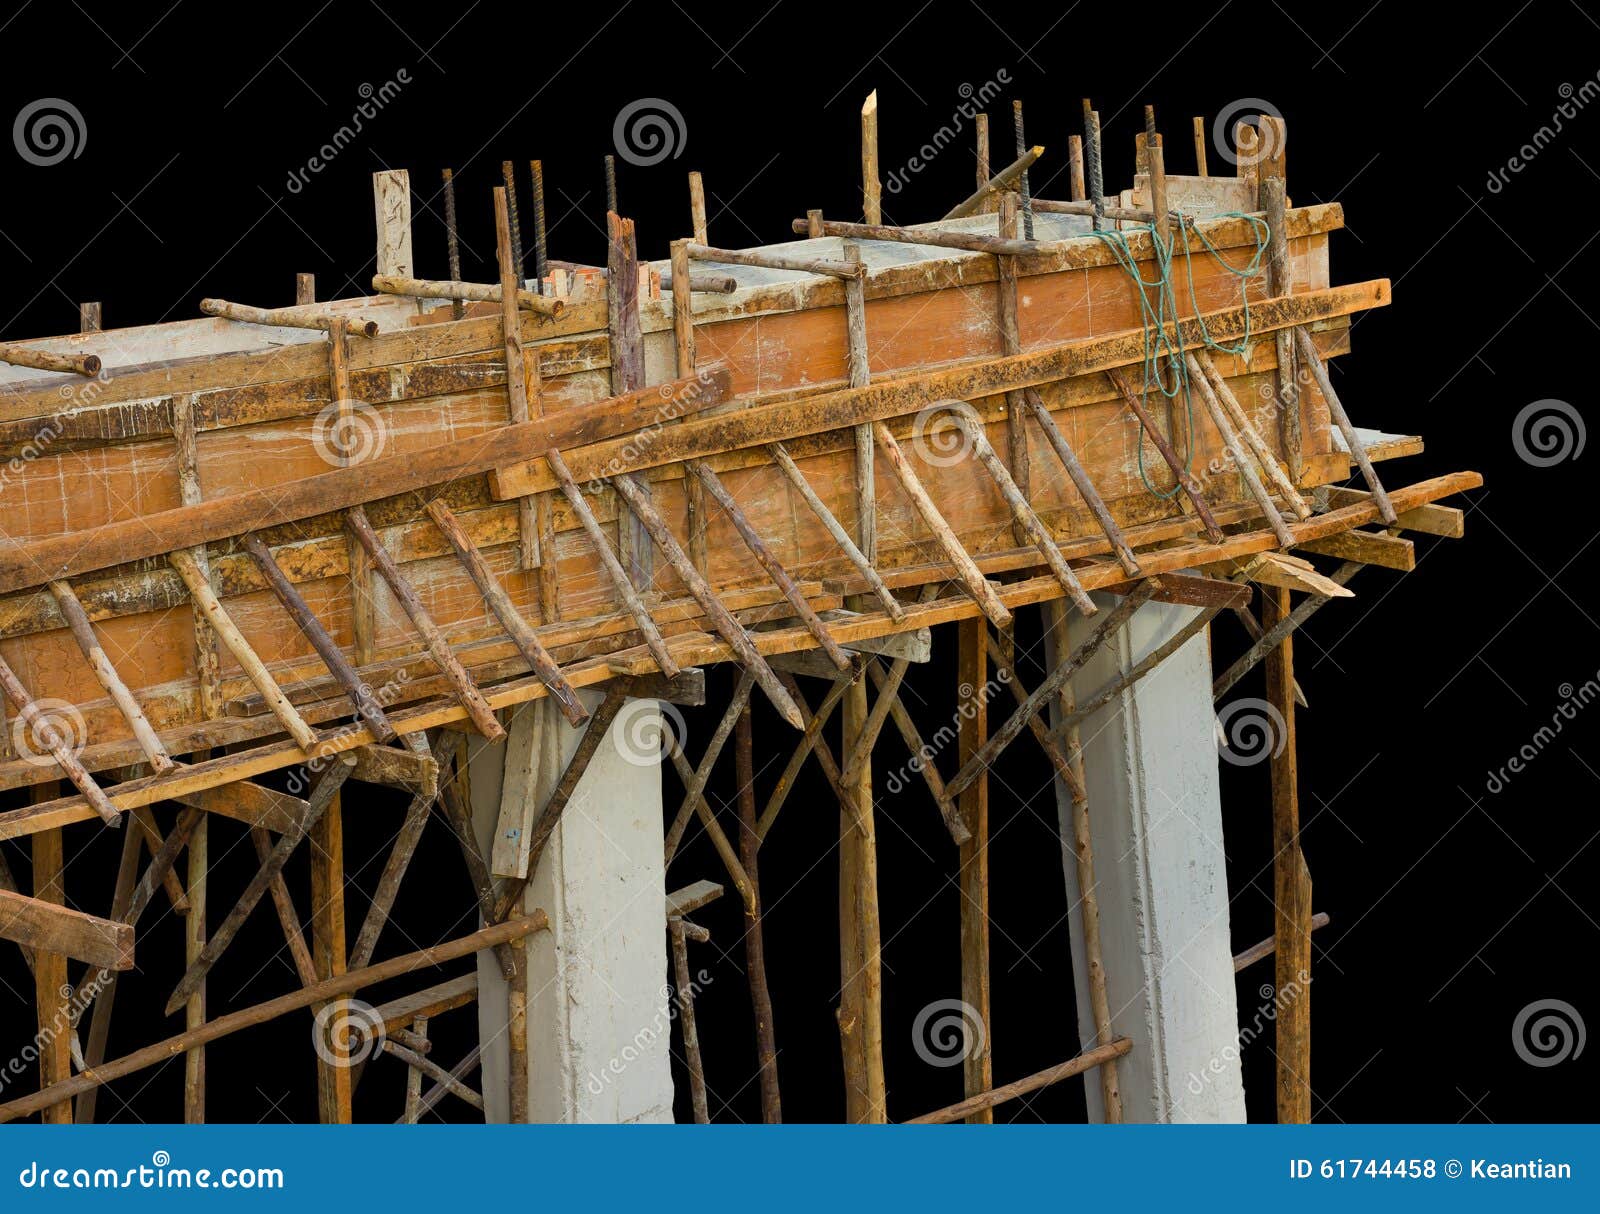 A Temporary Bridge At Under Construction Site Stock ...